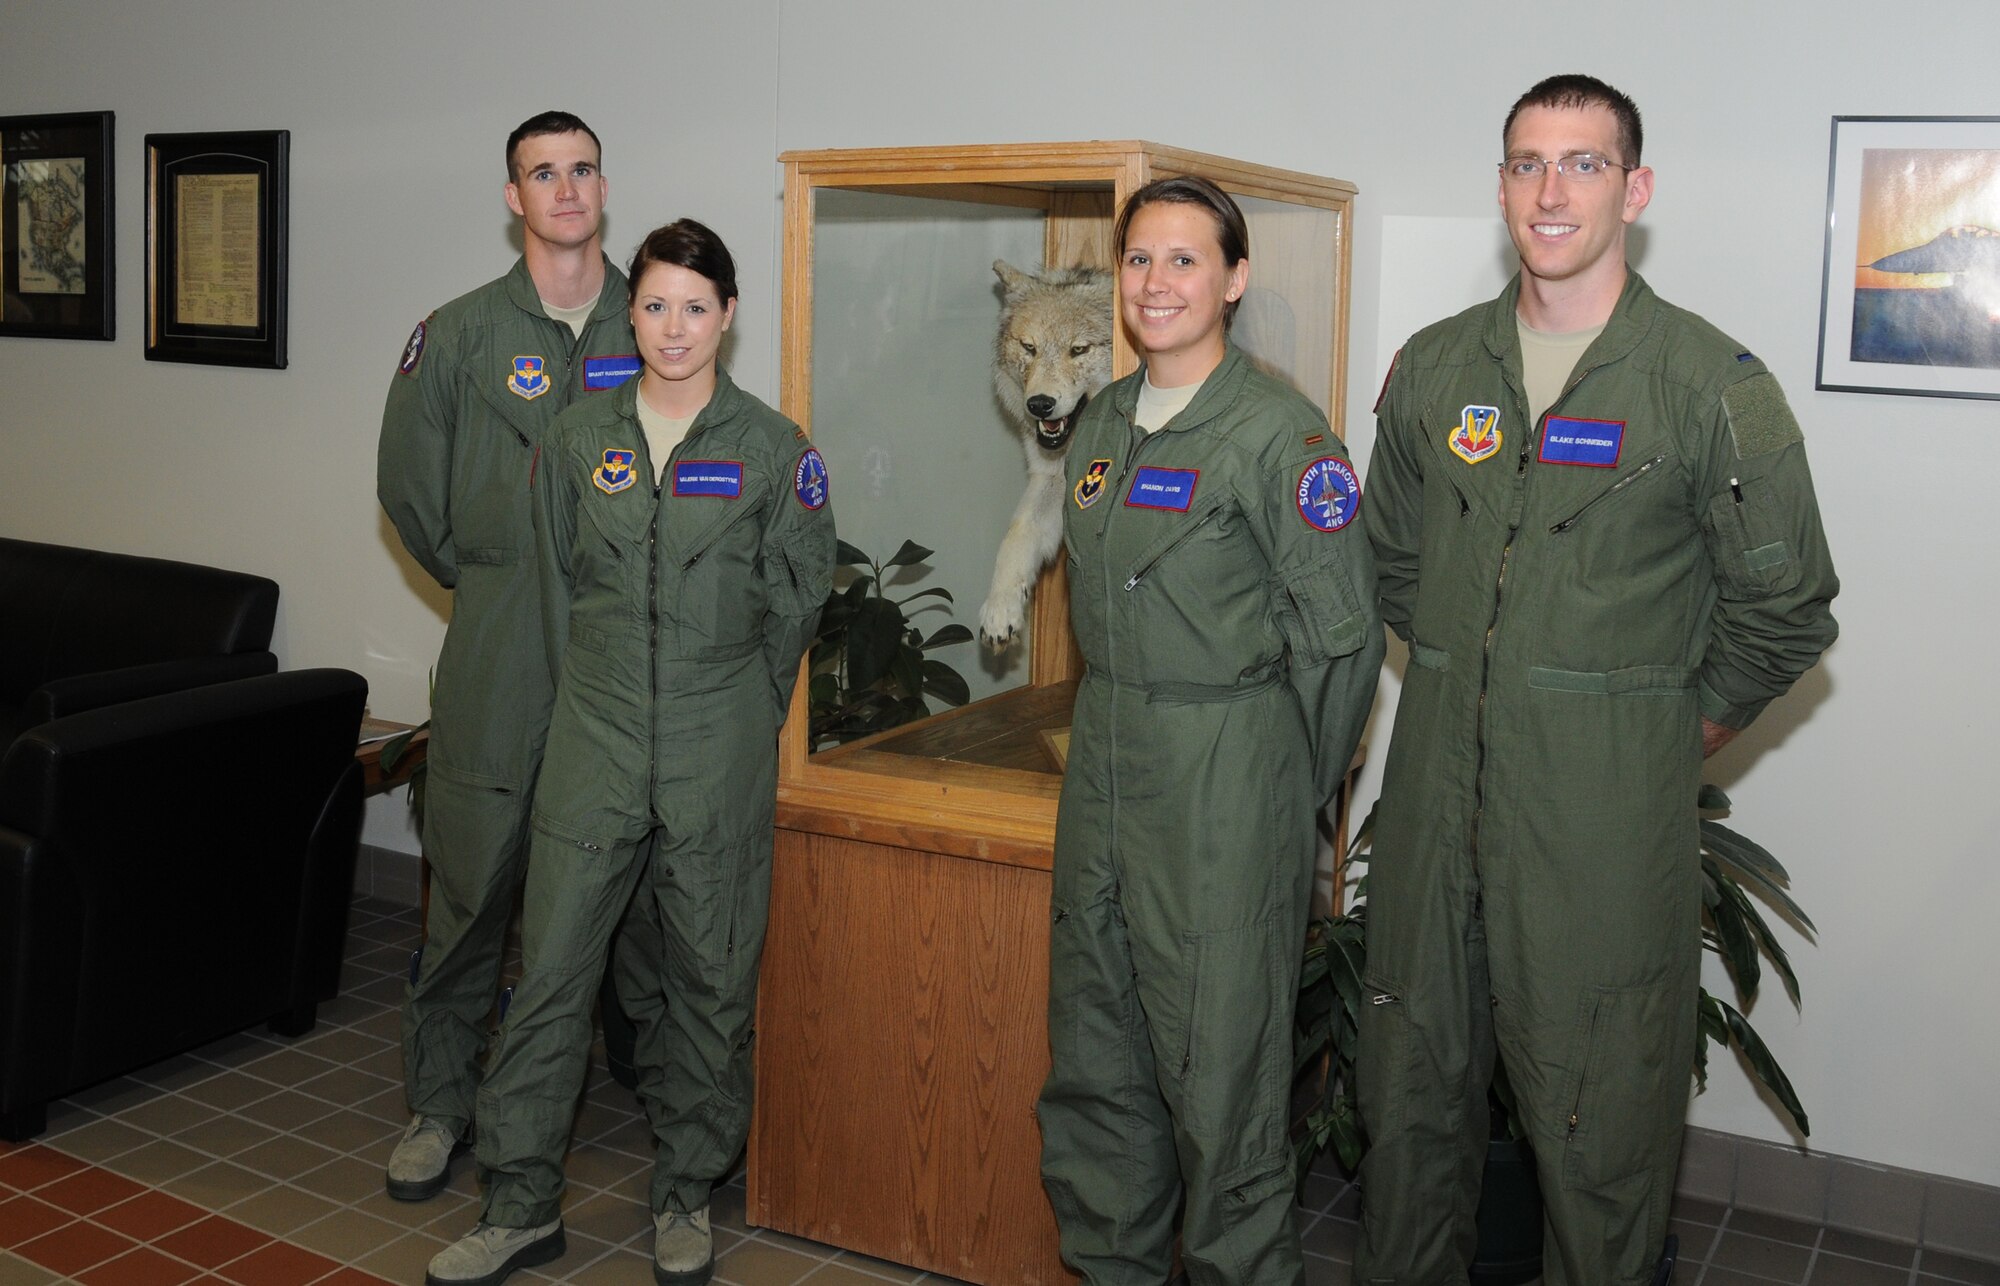 SIOUX FALLS, S.D. - New F-16 pilot candidates for the 175th Fighter Squadron, South Dakota Air National Guard include, left to right; 2nd Lt. Brant Ravenscroft, 2nd Lt. Valerie Vanderostyne, 2nd Lt. Shanon Davis, and 1st Lt. Blake Schneider.  The new "Lobos" will be attending Undergraduate Pilot Training over the next 13 months and amongst them is the unit's first two female F-16 pilots. (National Guard photo by Master Sgt. Christopher Stewart)(Released)